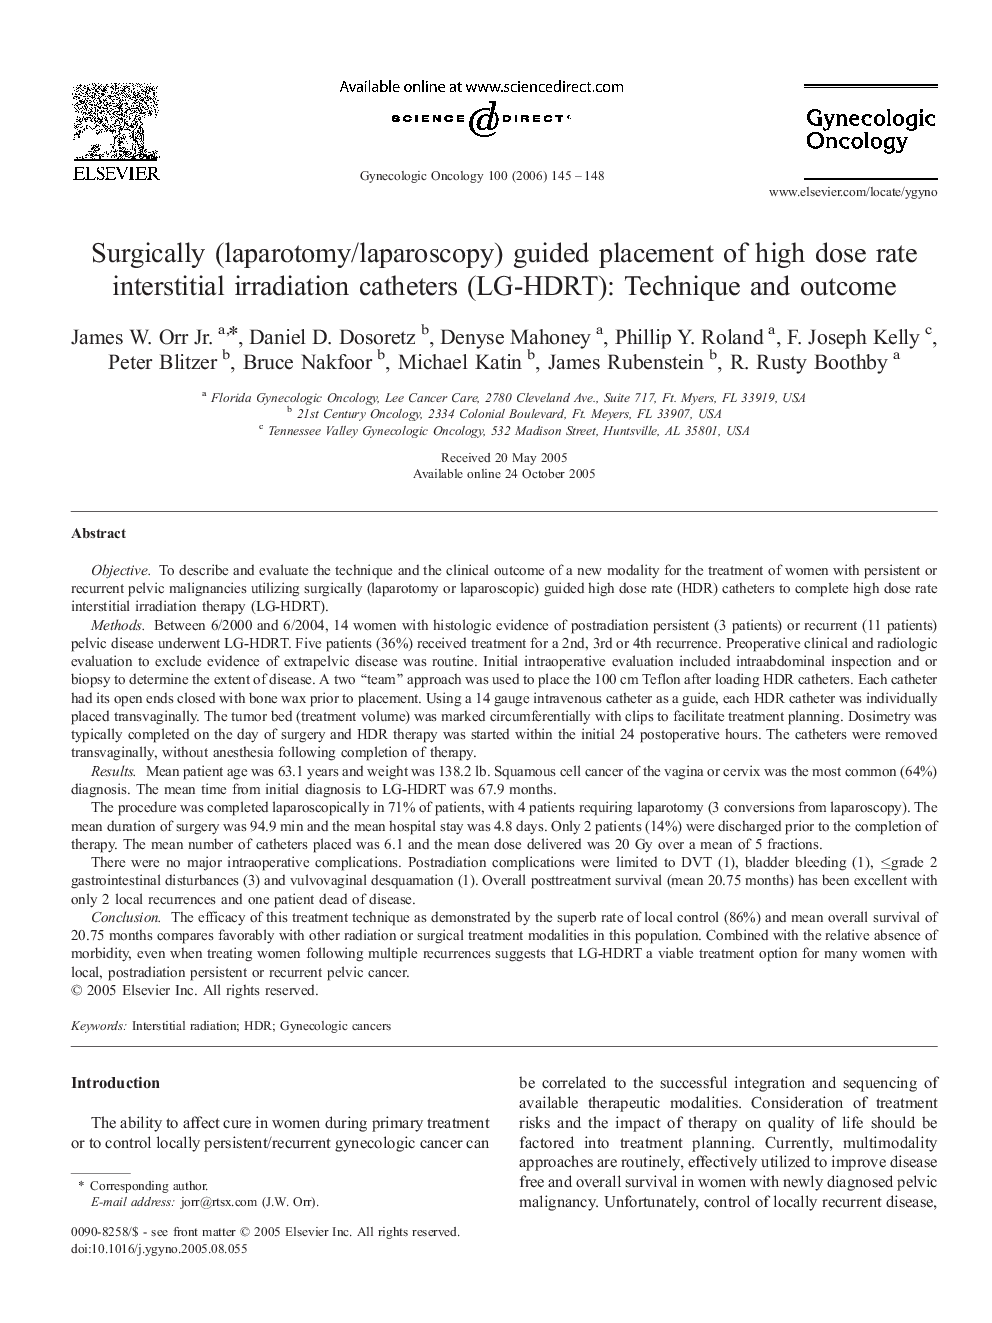 Surgically (laparotomy/laparoscopy) guided placement of high dose rate interstitial irradiation catheters (LG-HDRT): Technique and outcome